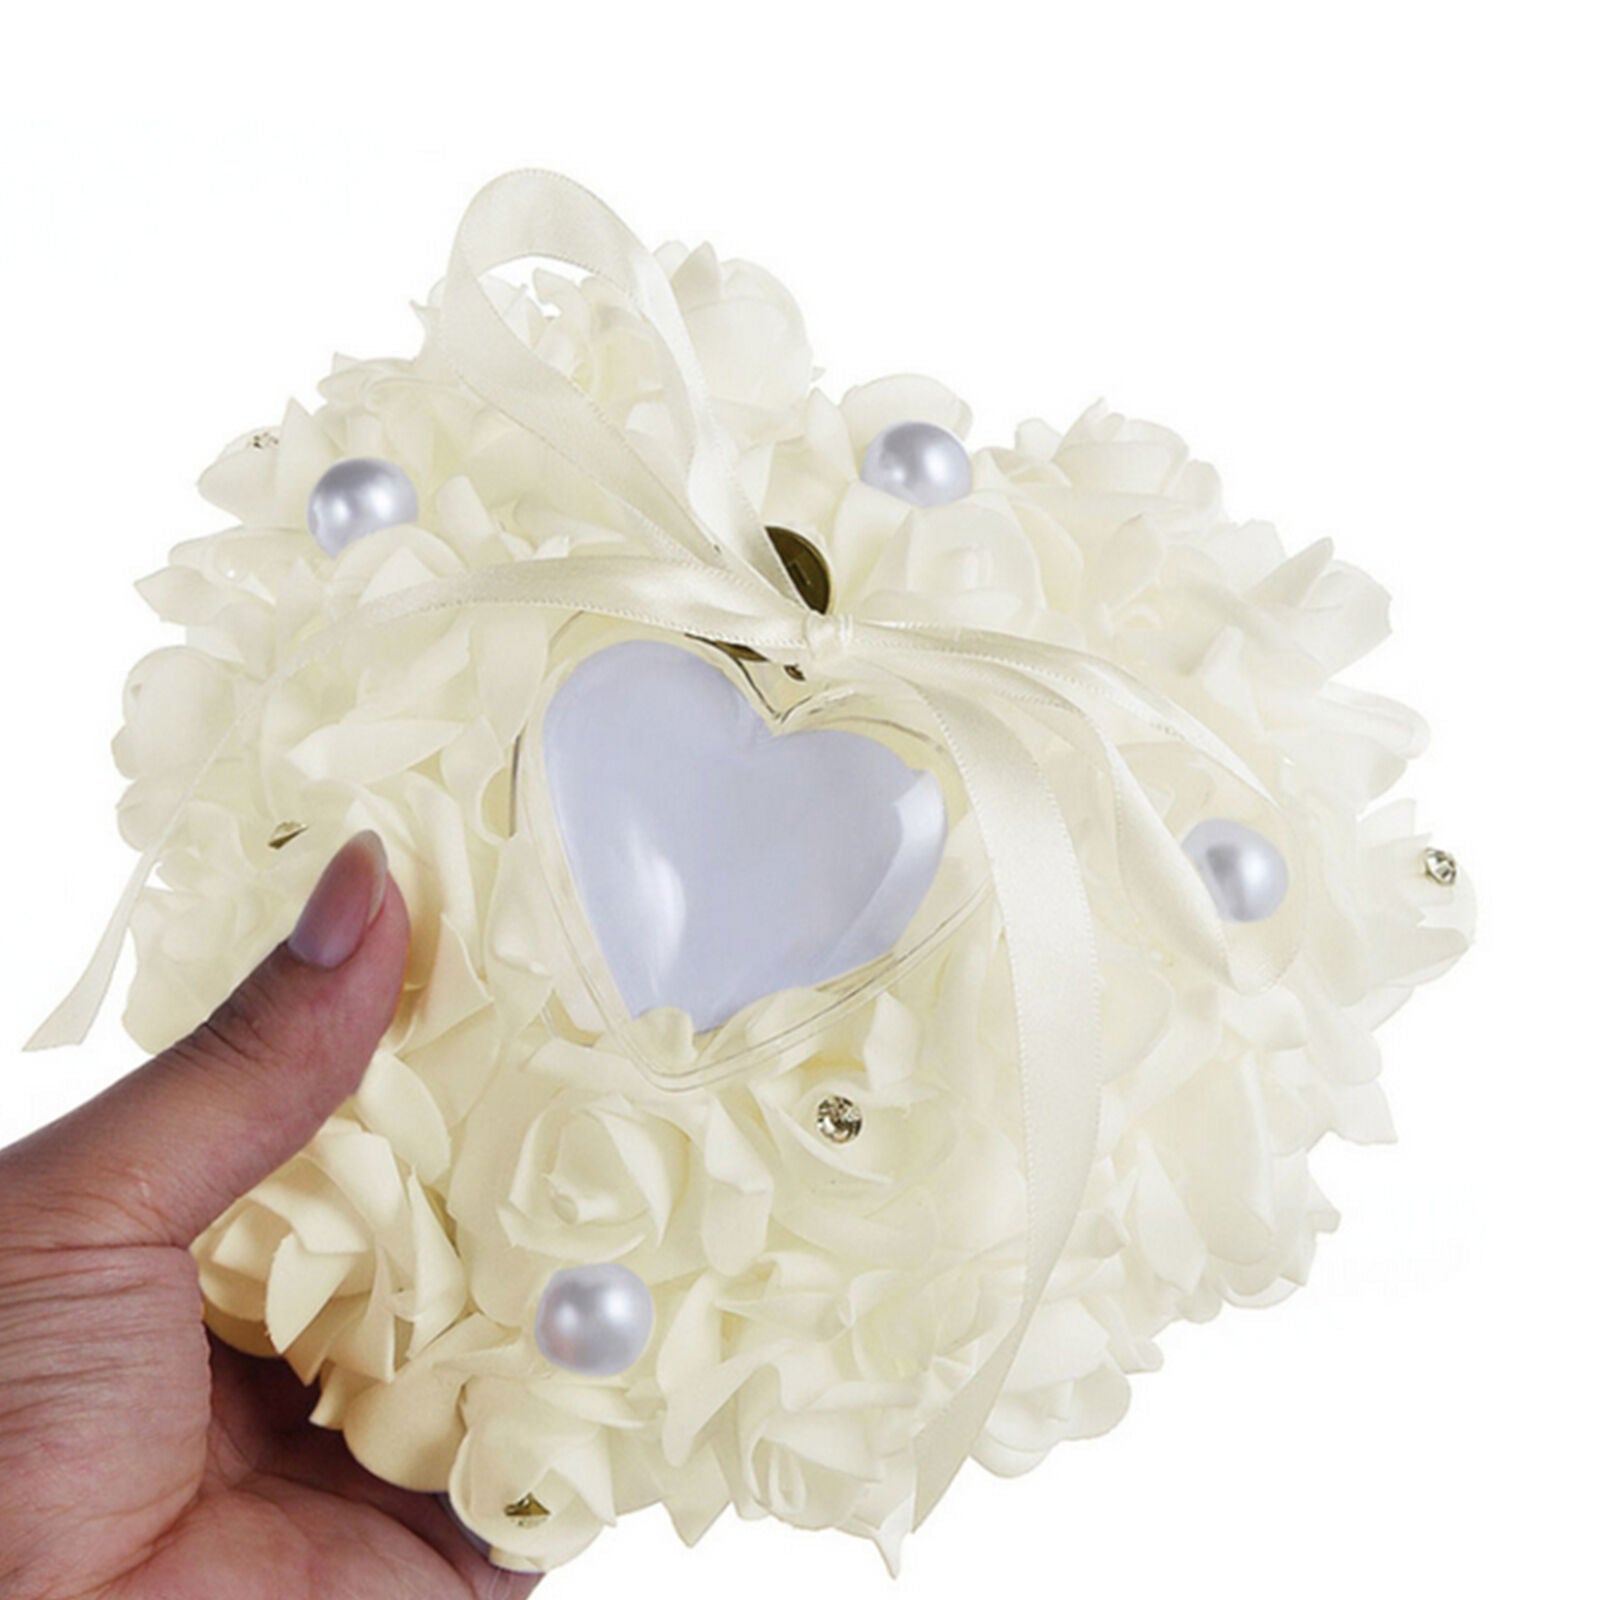 Wedding Ceremony White Satin Crystal Flower Ring Bearer Pillow Cushion Gifts